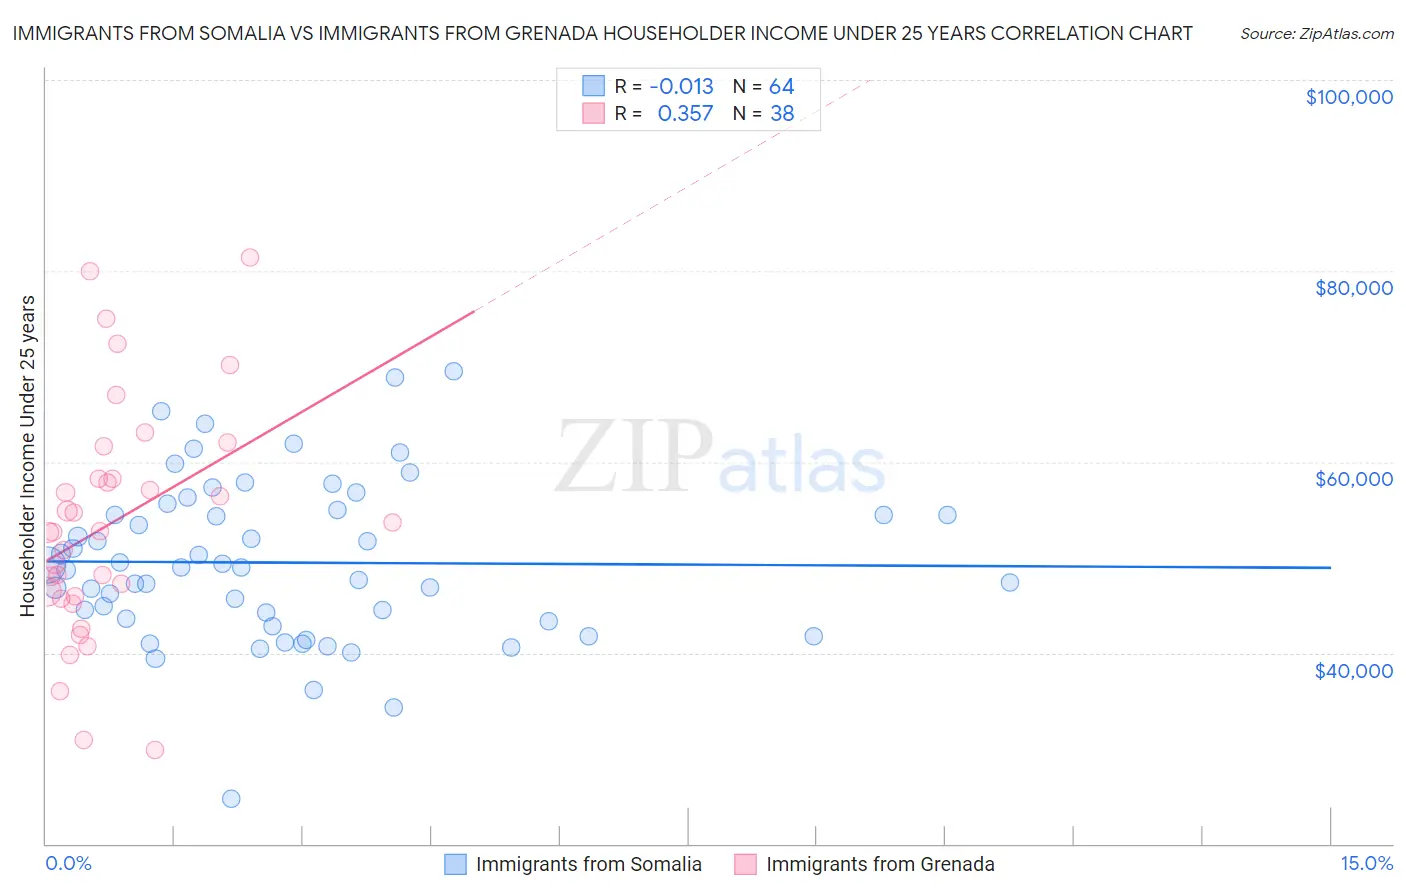 Immigrants from Somalia vs Immigrants from Grenada Householder Income Under 25 years